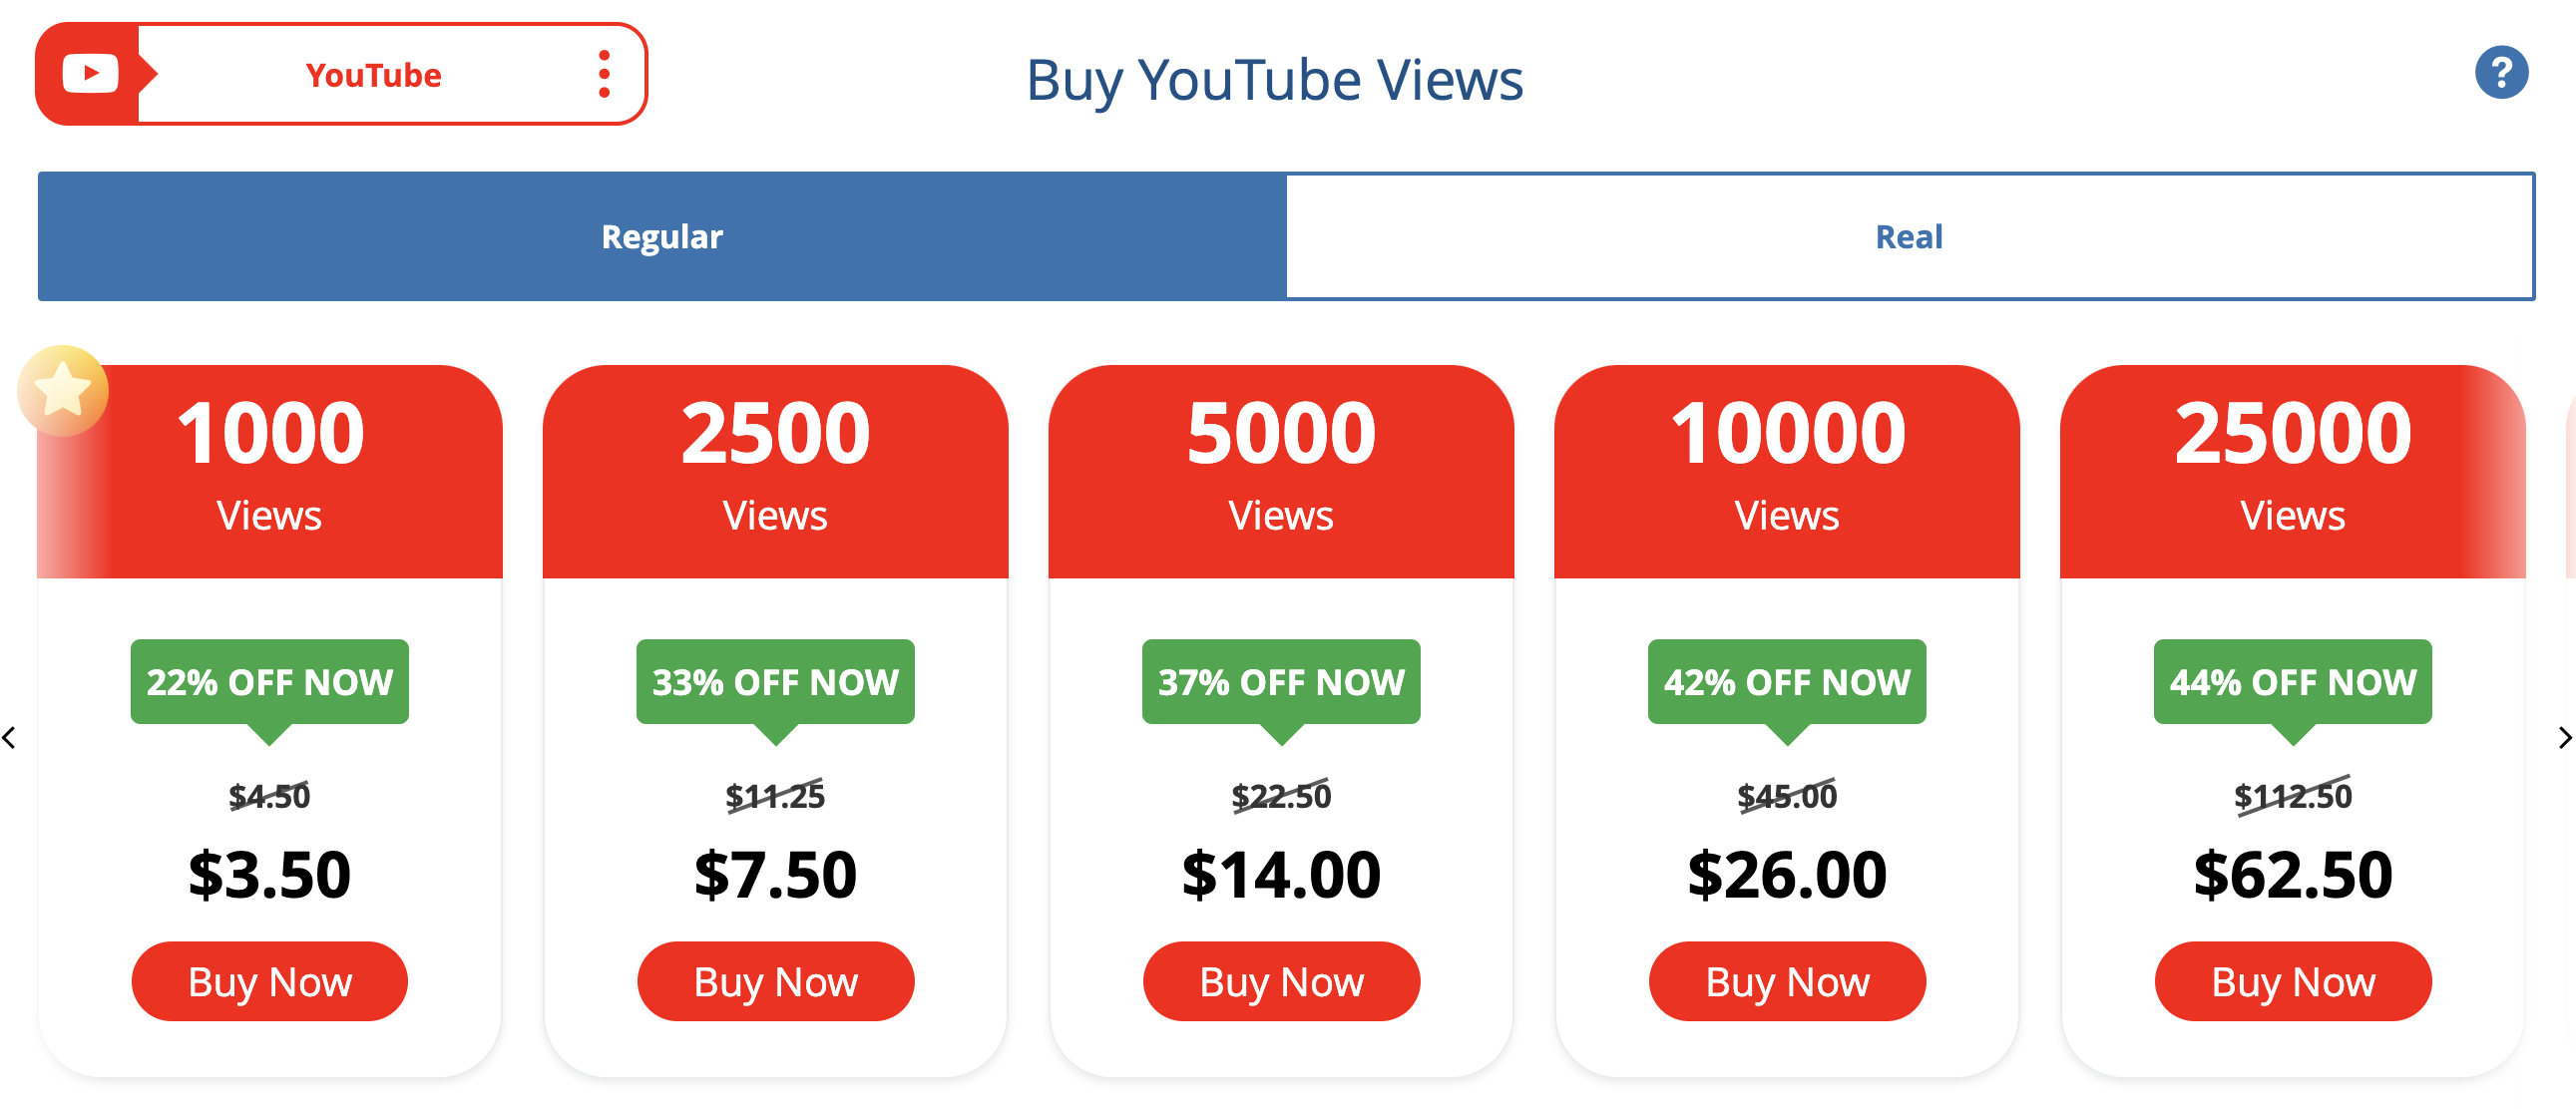 Buy YouTube Views From These 6 Reliable Sites | Entrepreneur